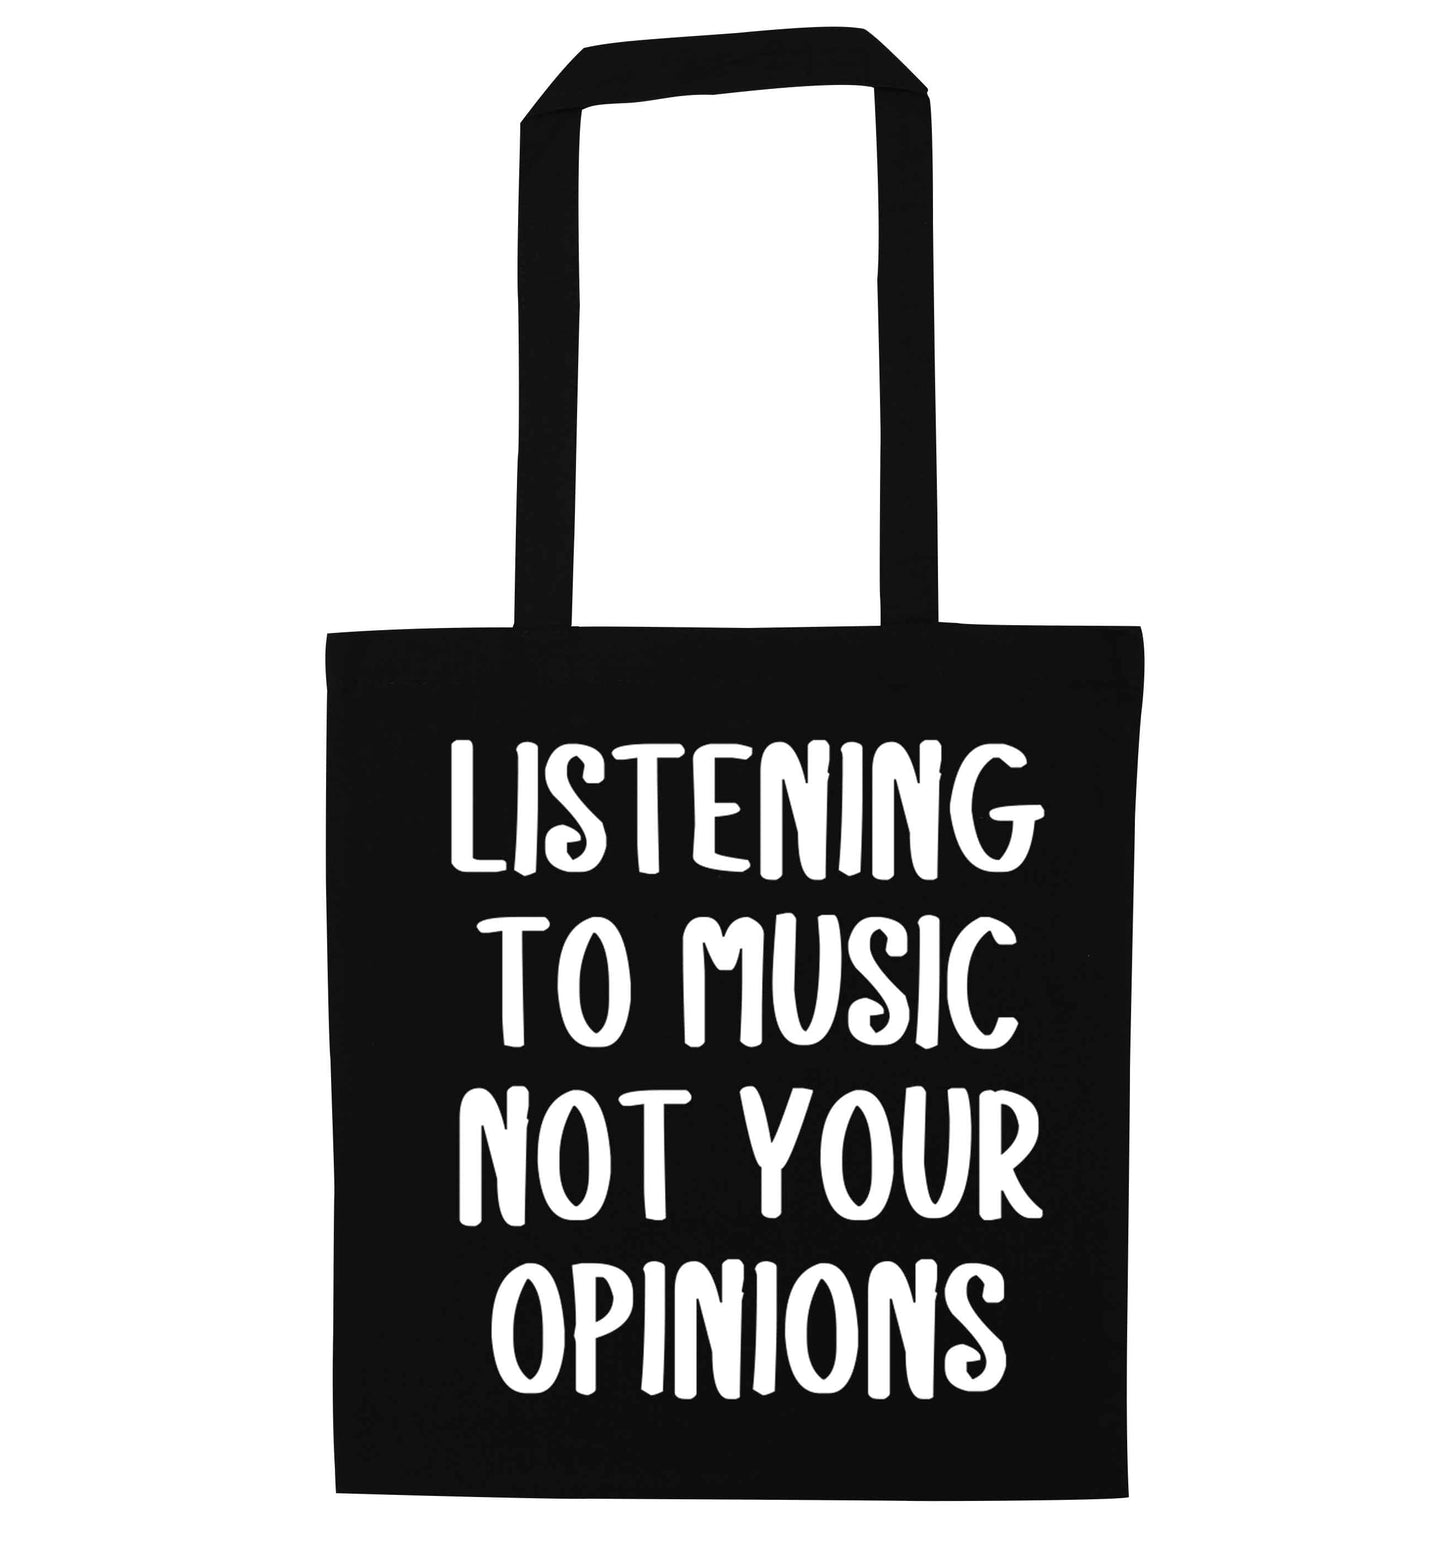 Listening to music not your opinions black tote bag